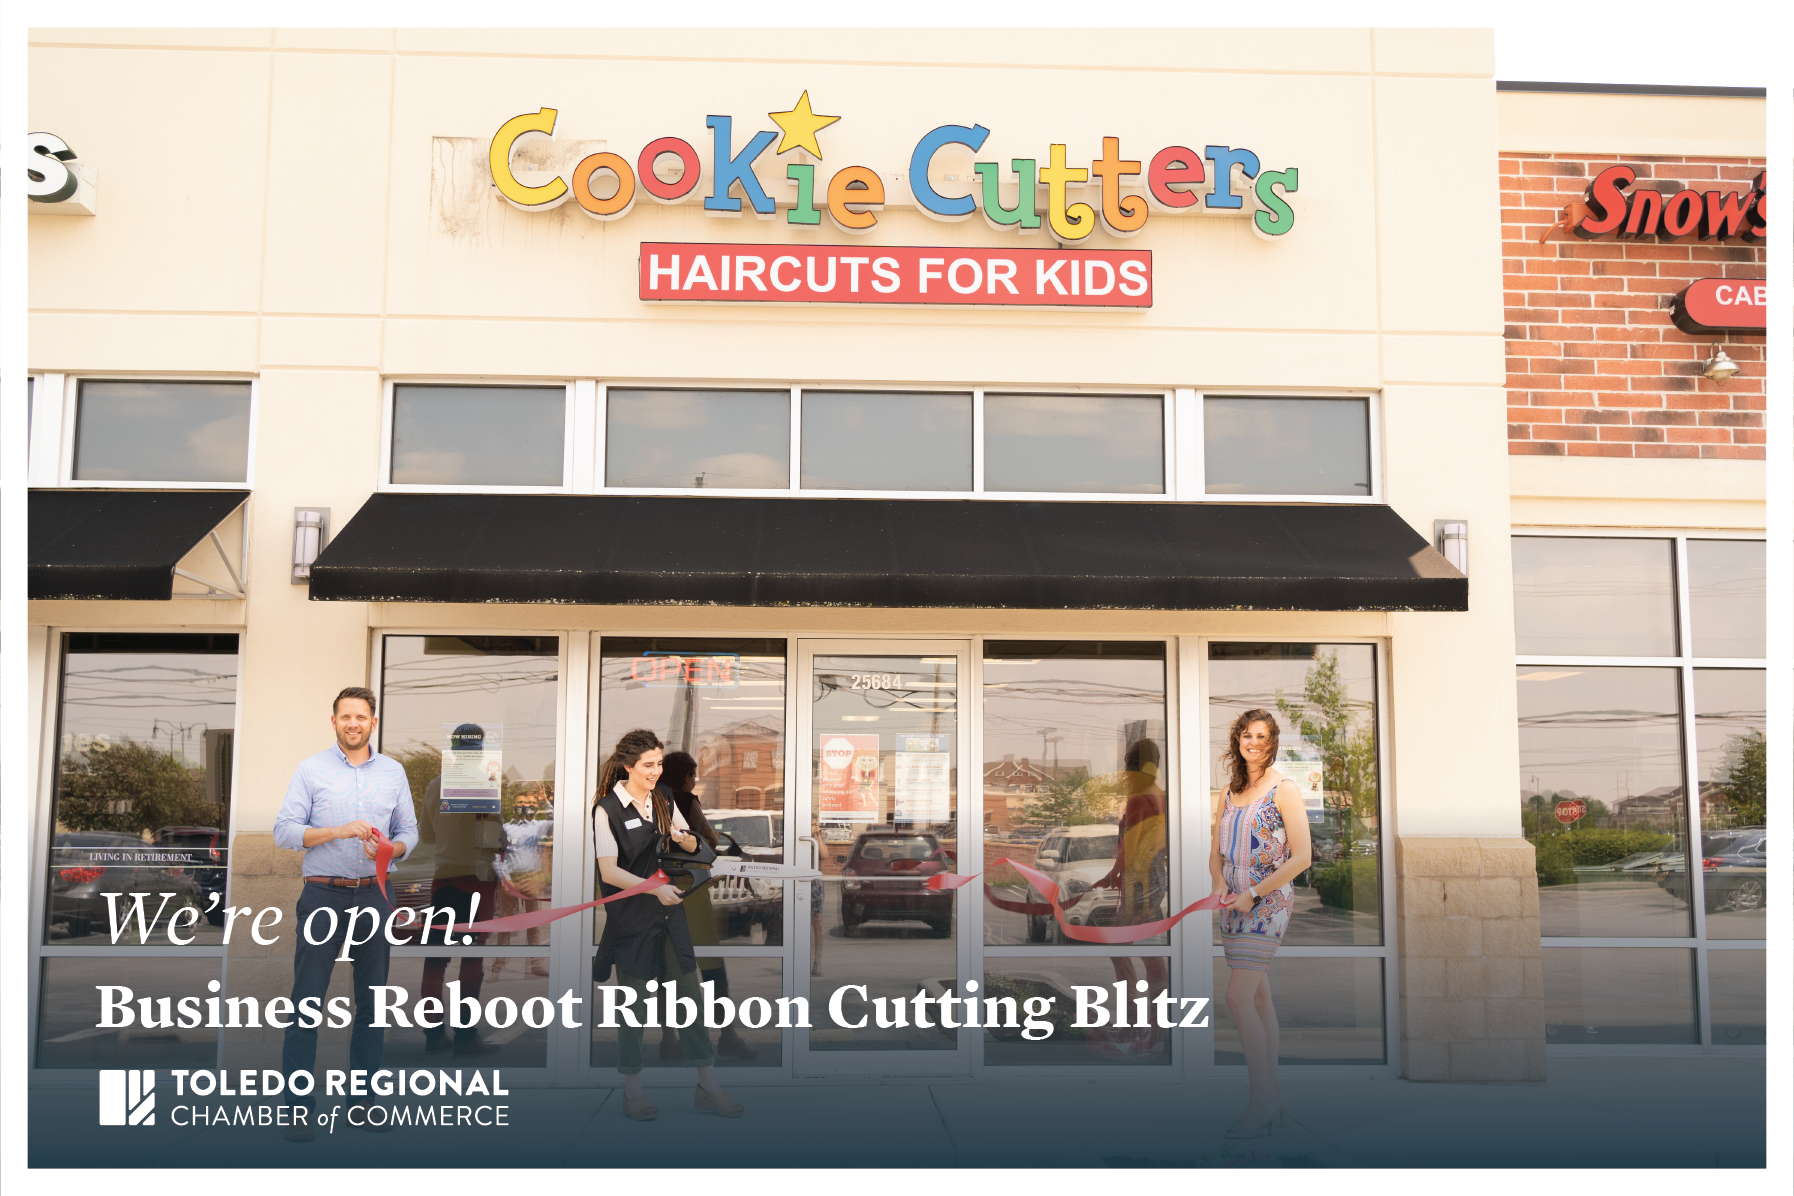 Cookie Cutters Haircuts for Kids - Perrysburg